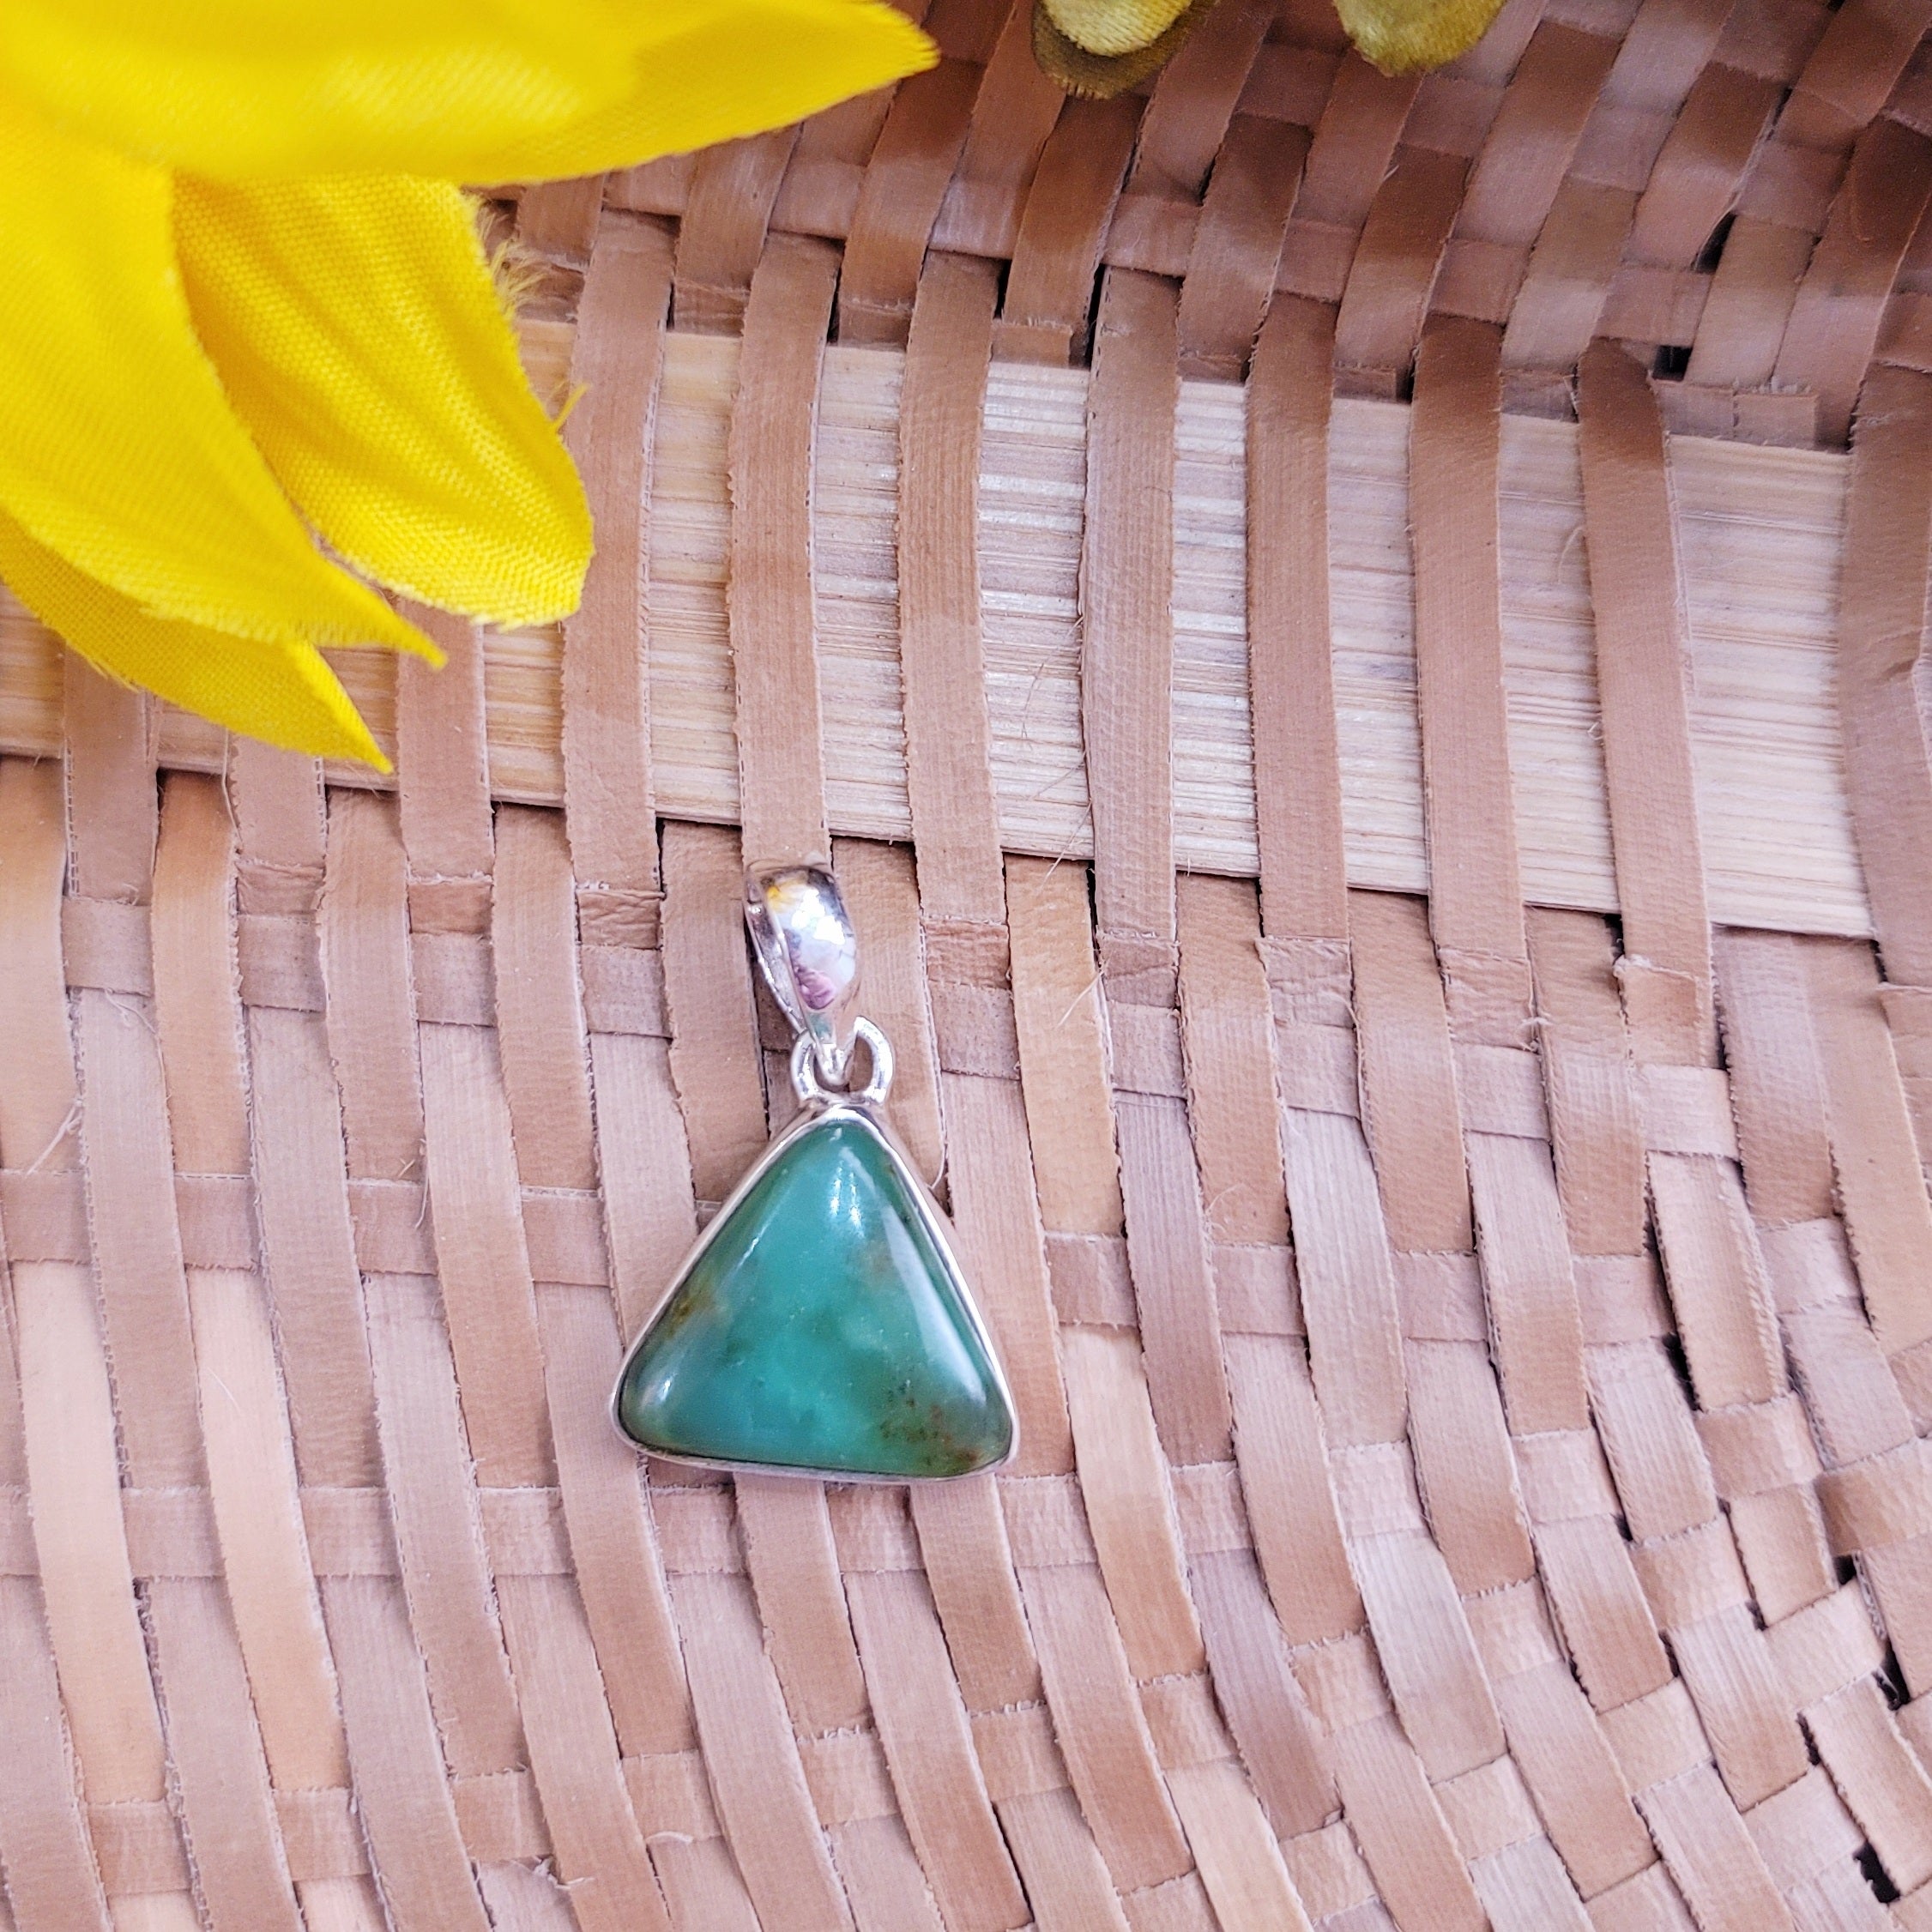 Chrysoprase Pendant .925 Silver for Heart Healing, Growth & Rebirth